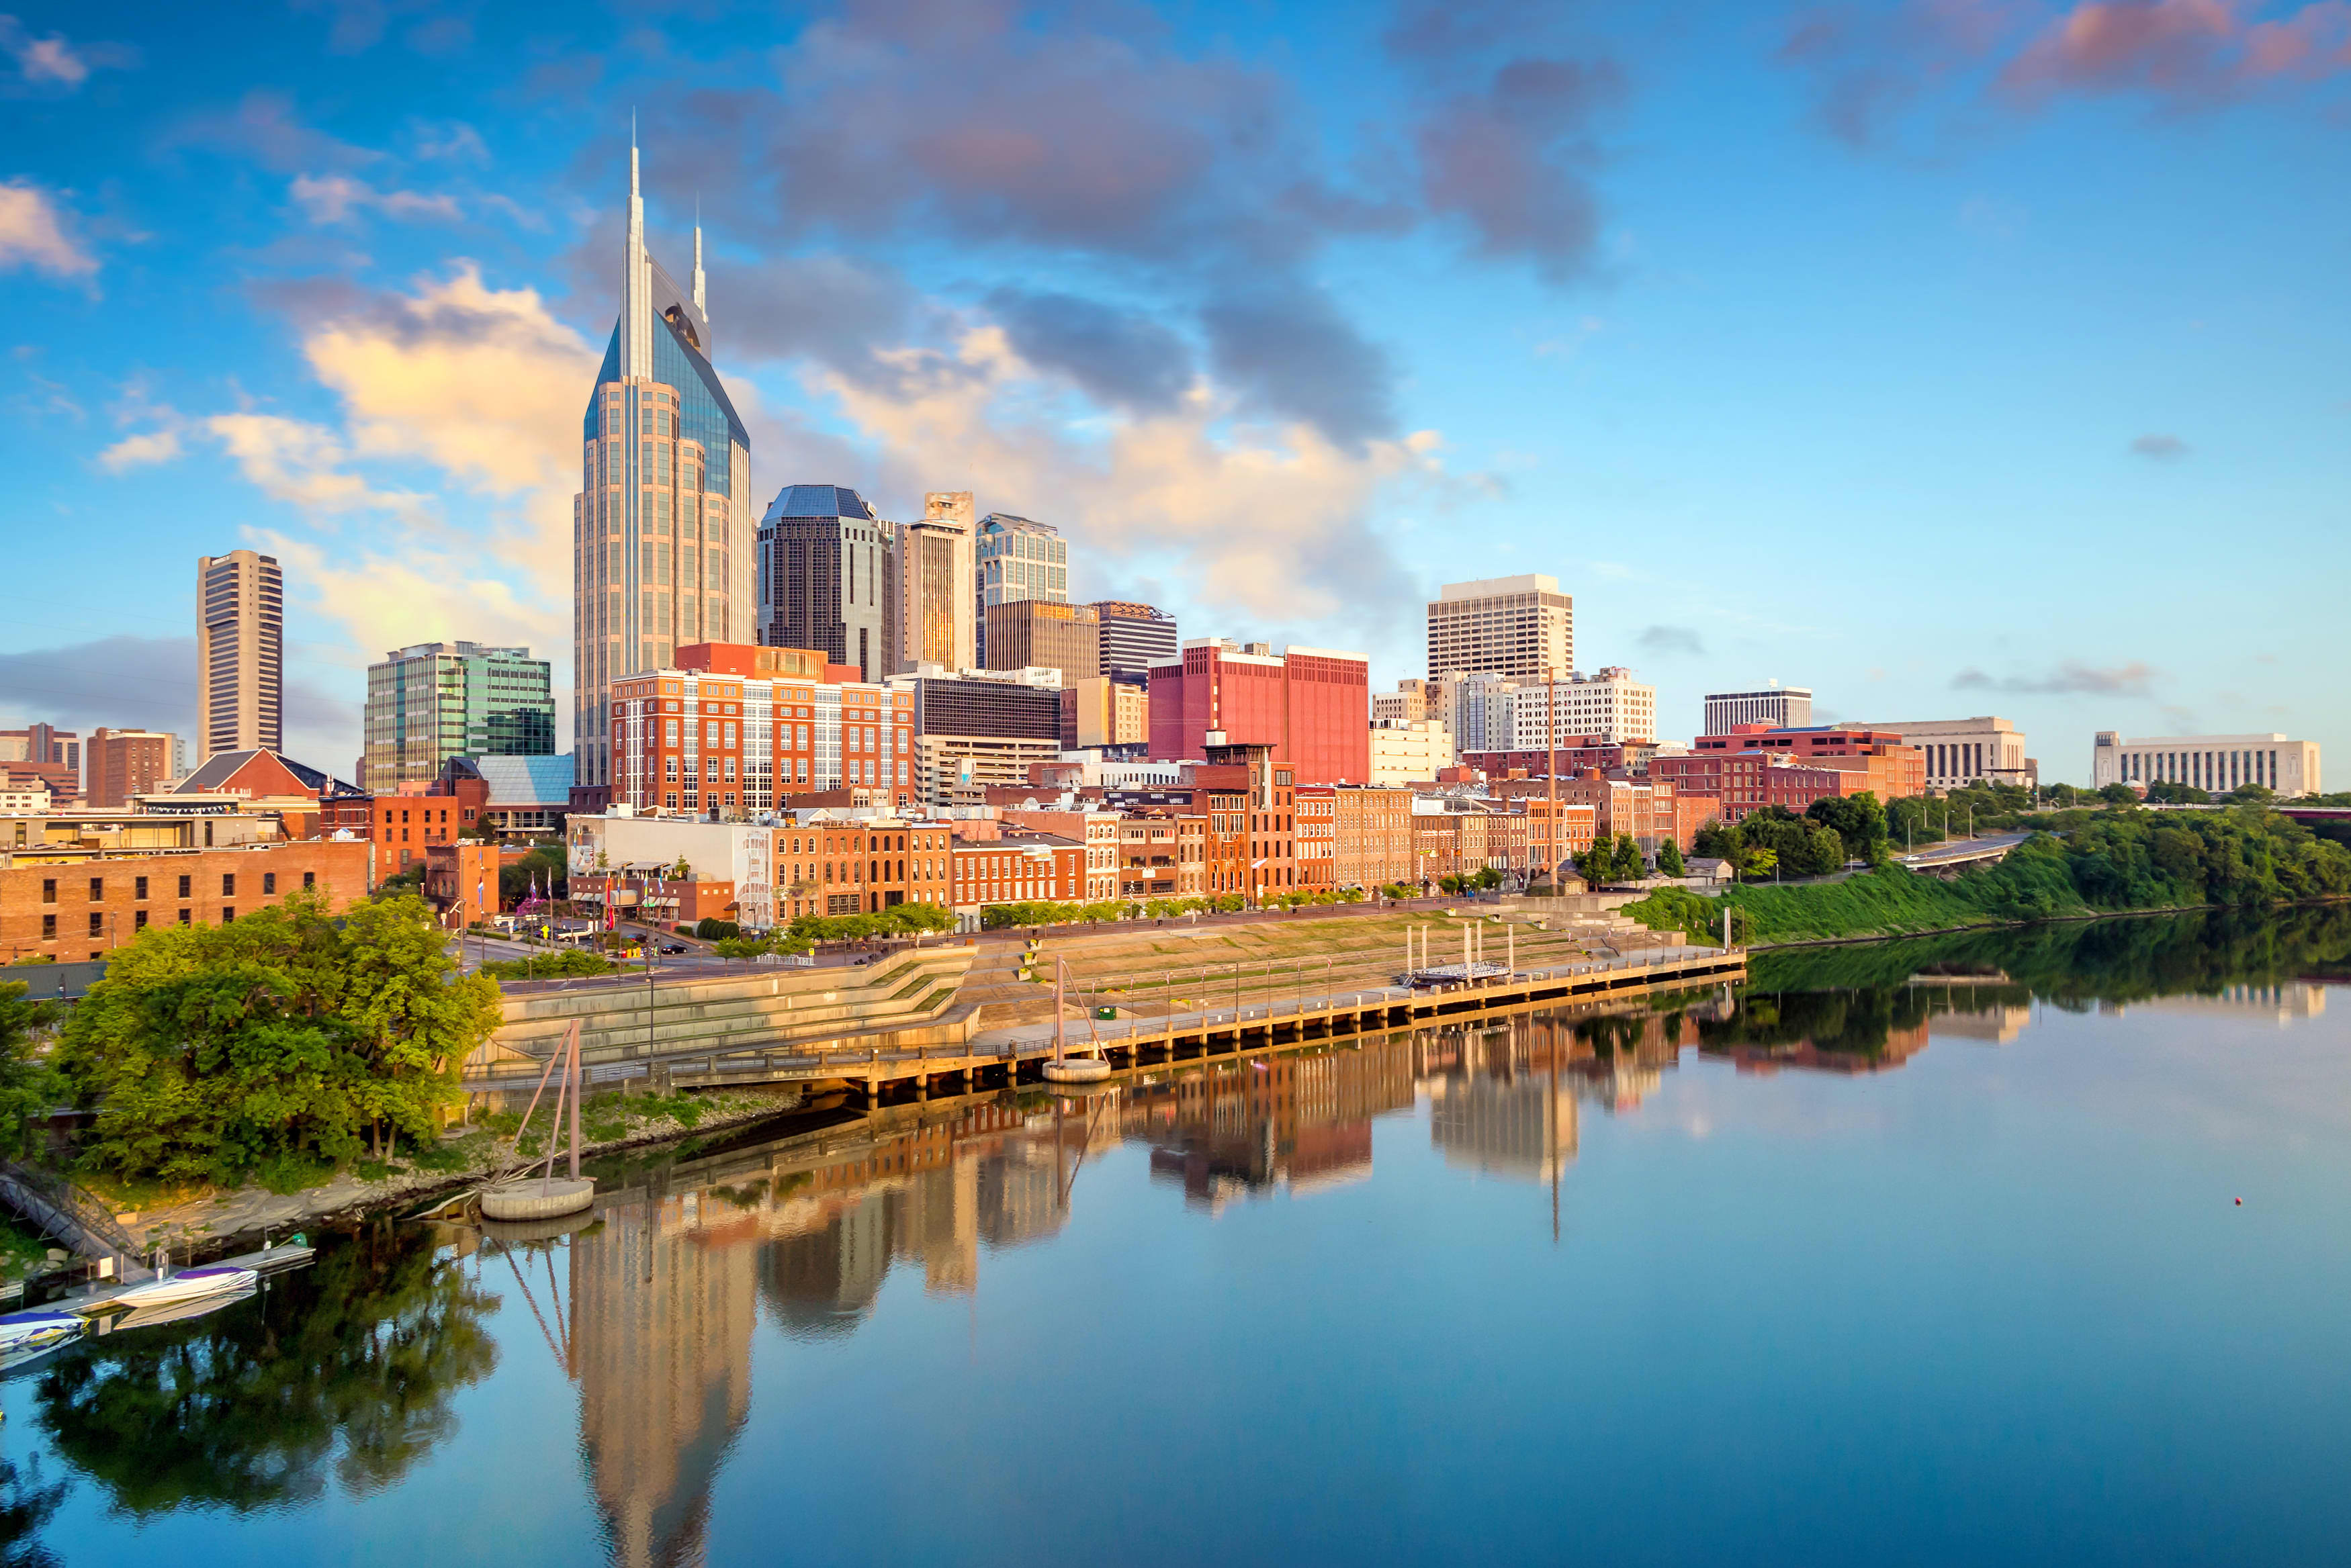 Skyline view of buildings along the Cumberland River in downtown Nashville, Tennessee